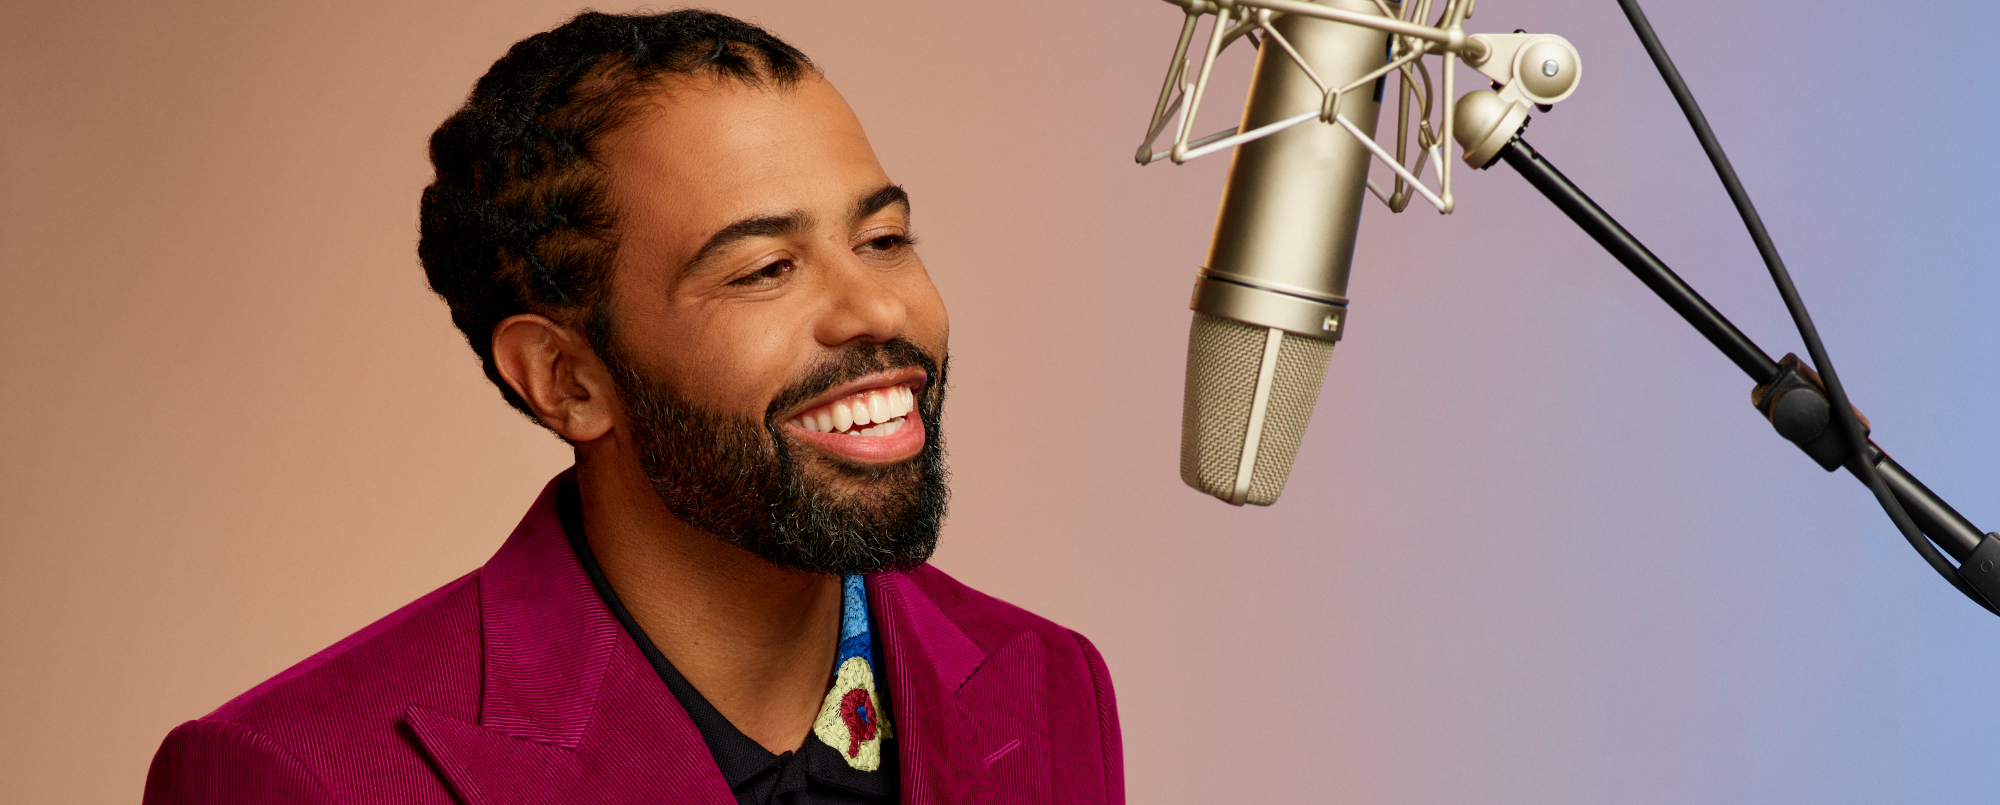 ‘Hamilton’ Star Daveed Diggs Hosts New Audible Singing Competition ‘Breakthrough’